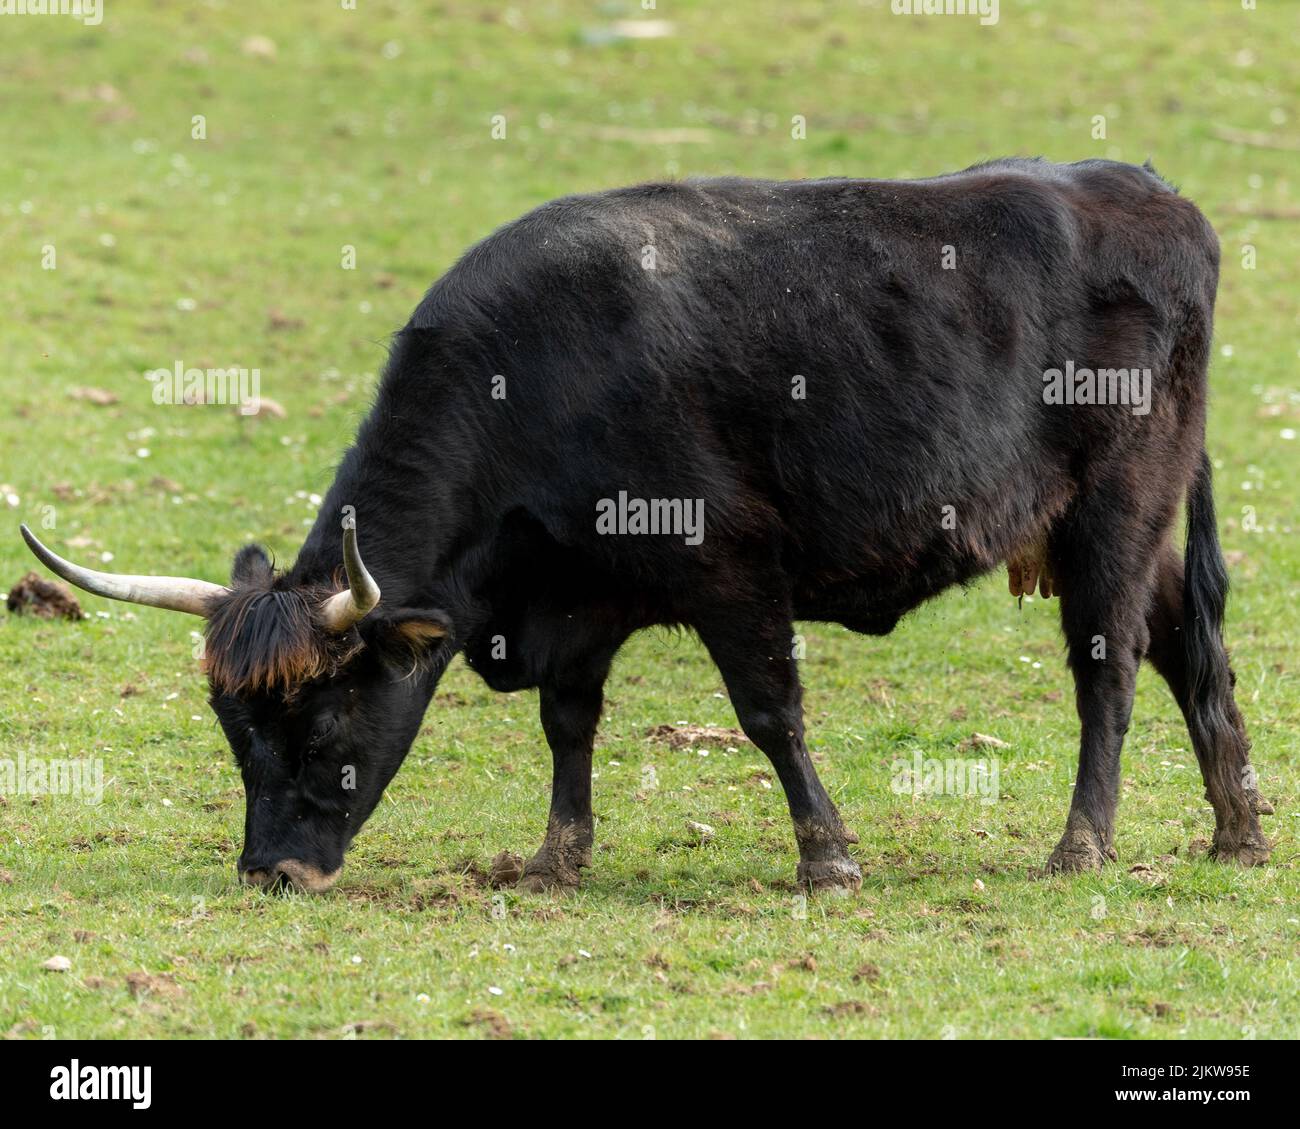 A closeup of a Heck cattle grazing on a field covered with green grass Stock Photo